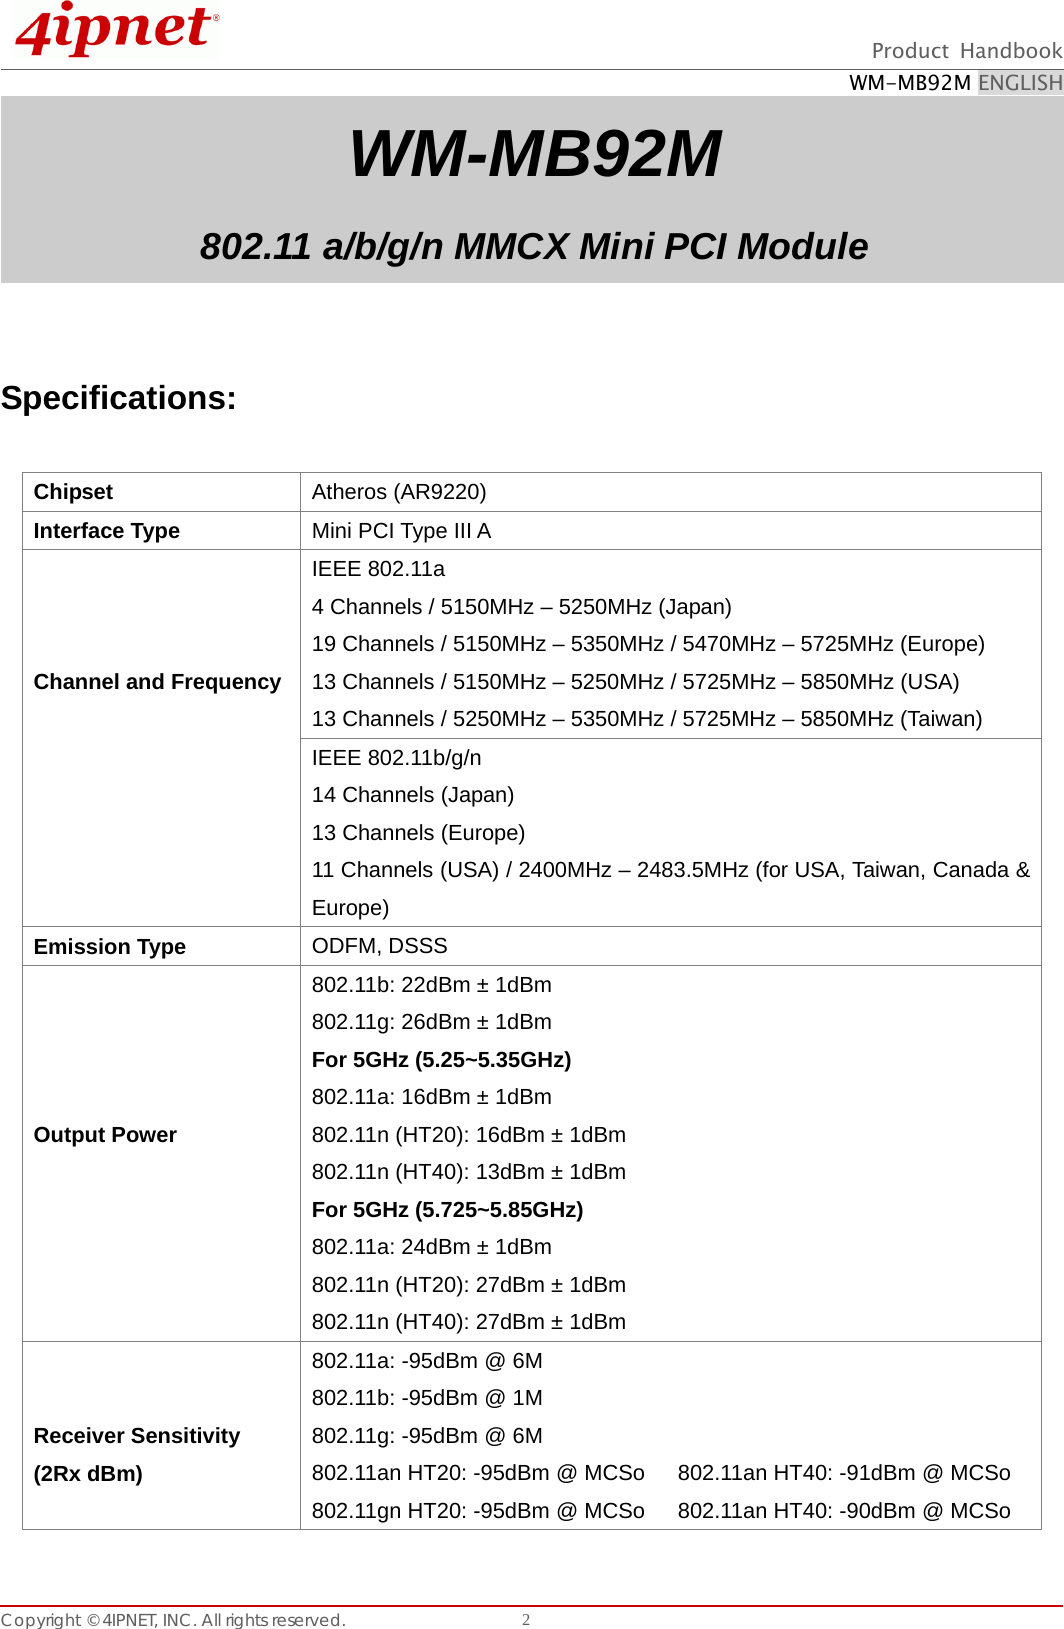  Product Handbook WM-MB92M ENGLISH Copyright © 4IPNET, INC. All rights reserved.    2WM-MB92M 802.11 a/b/g/n MMCX Mini PCI Module   Specifications:    Chipset  Atheros (AR9220) Interface Type  Mini PCI Type III A    Channel and FrequencyIEEE 802.11a 4 Channels / 5150MHz – 5250MHz (Japan) 19 Channels / 5150MHz – 5350MHz / 5470MHz – 5725MHz (Europe) 13 Channels / 5150MHz – 5250MHz / 5725MHz – 5850MHz (USA) 13 Channels / 5250MHz – 5350MHz / 5725MHz – 5850MHz (Taiwan) IEEE 802.11b/g/n 14 Channels (Japan) 13 Channels (Europe) 11 Channels (USA) / 2400MHz – 2483.5MHz (for USA, Taiwan, Canada &amp; Europe) Emission Type  ODFM, DSSS     Output Power   802.11b: 22dBm ± 1dBm   802.11g: 26dBm ± 1dBm   For 5GHz (5.25~5.35GHz) 802.11a: 16dBm ± 1dBm 802.11n (HT20): 16dBm ± 1dBm 802.11n (HT40): 13dBm ± 1dBm For 5GHz (5.725~5.85GHz) 802.11a: 24dBm ± 1dBm 802.11n (HT20): 27dBm ± 1dBm 802.11n (HT40): 27dBm ± 1dBm   Receiver Sensitivity   (2Rx dBm) 802.11a: -95dBm @ 6M 802.11b: -95dBm @ 1M 802.11g: -95dBm @ 6M 802.11an HT20: -95dBm @ MCSo      802.11an HT40: -91dBm @ MCSo 802.11gn HT20: -95dBm @ MCSo      802.11an HT40: -90dBm @ MCSo 